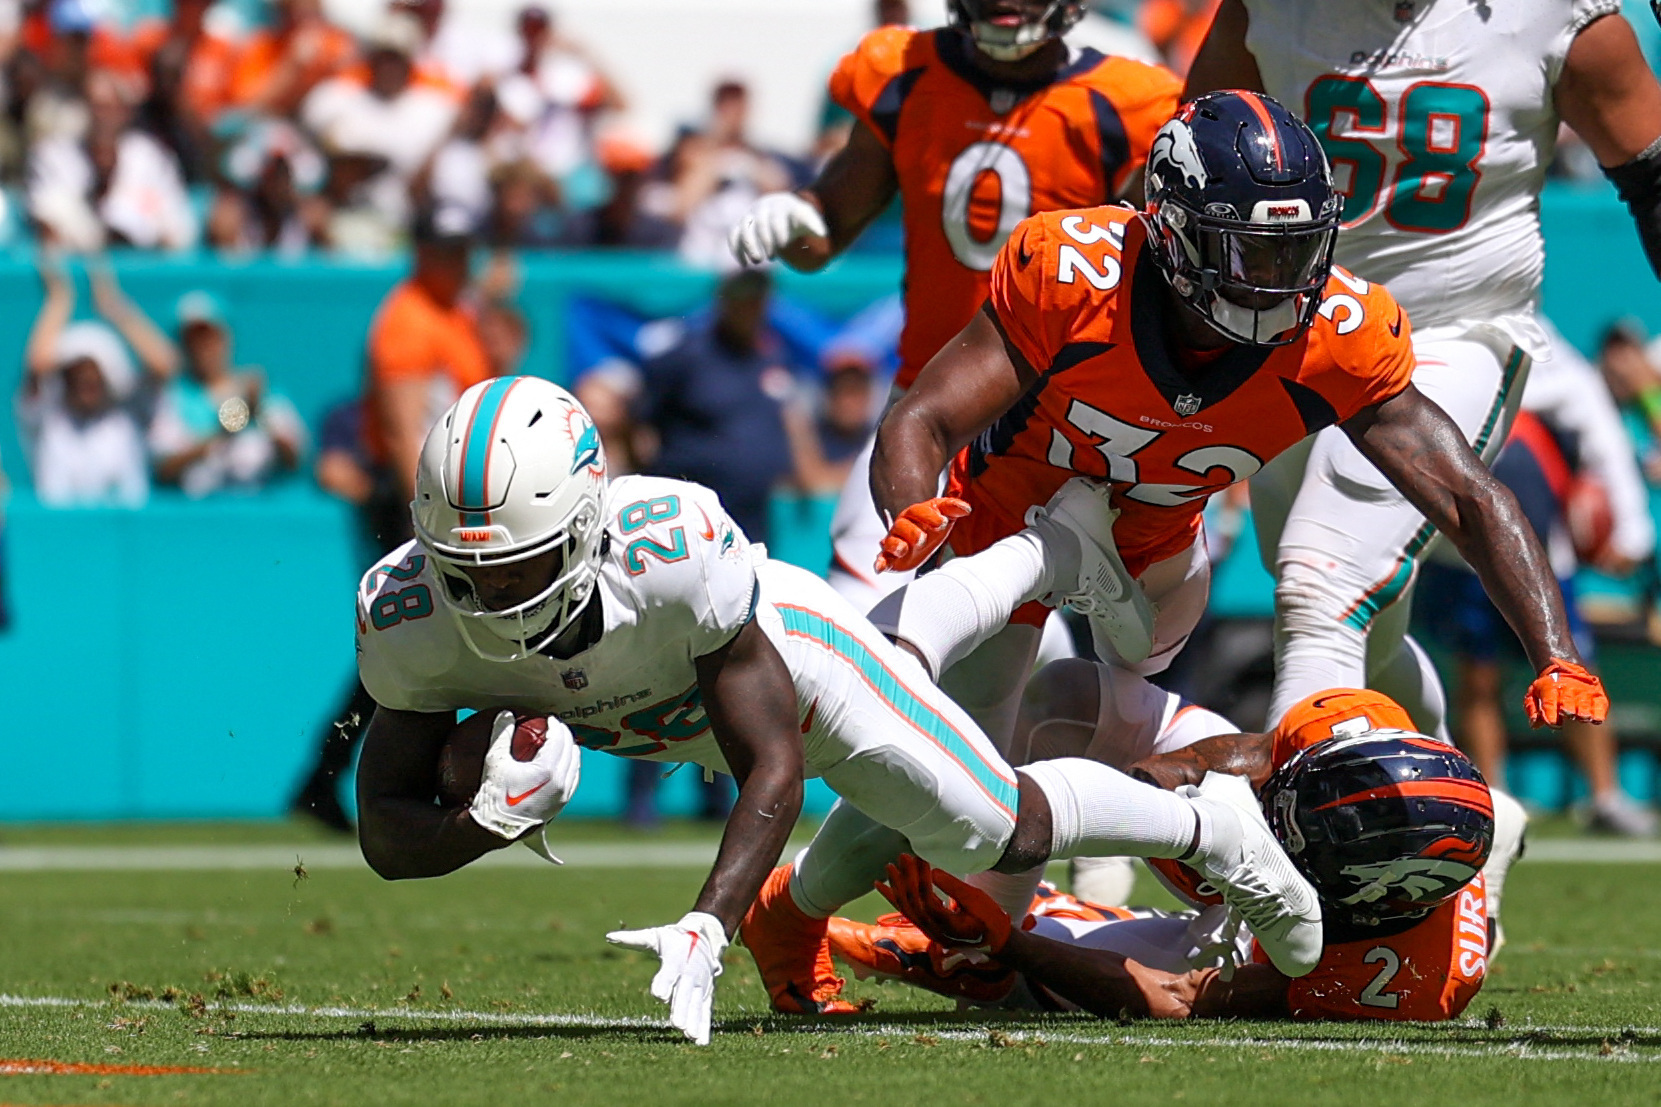 NFL roundup: Dolphins score 70 points in routing Broncos